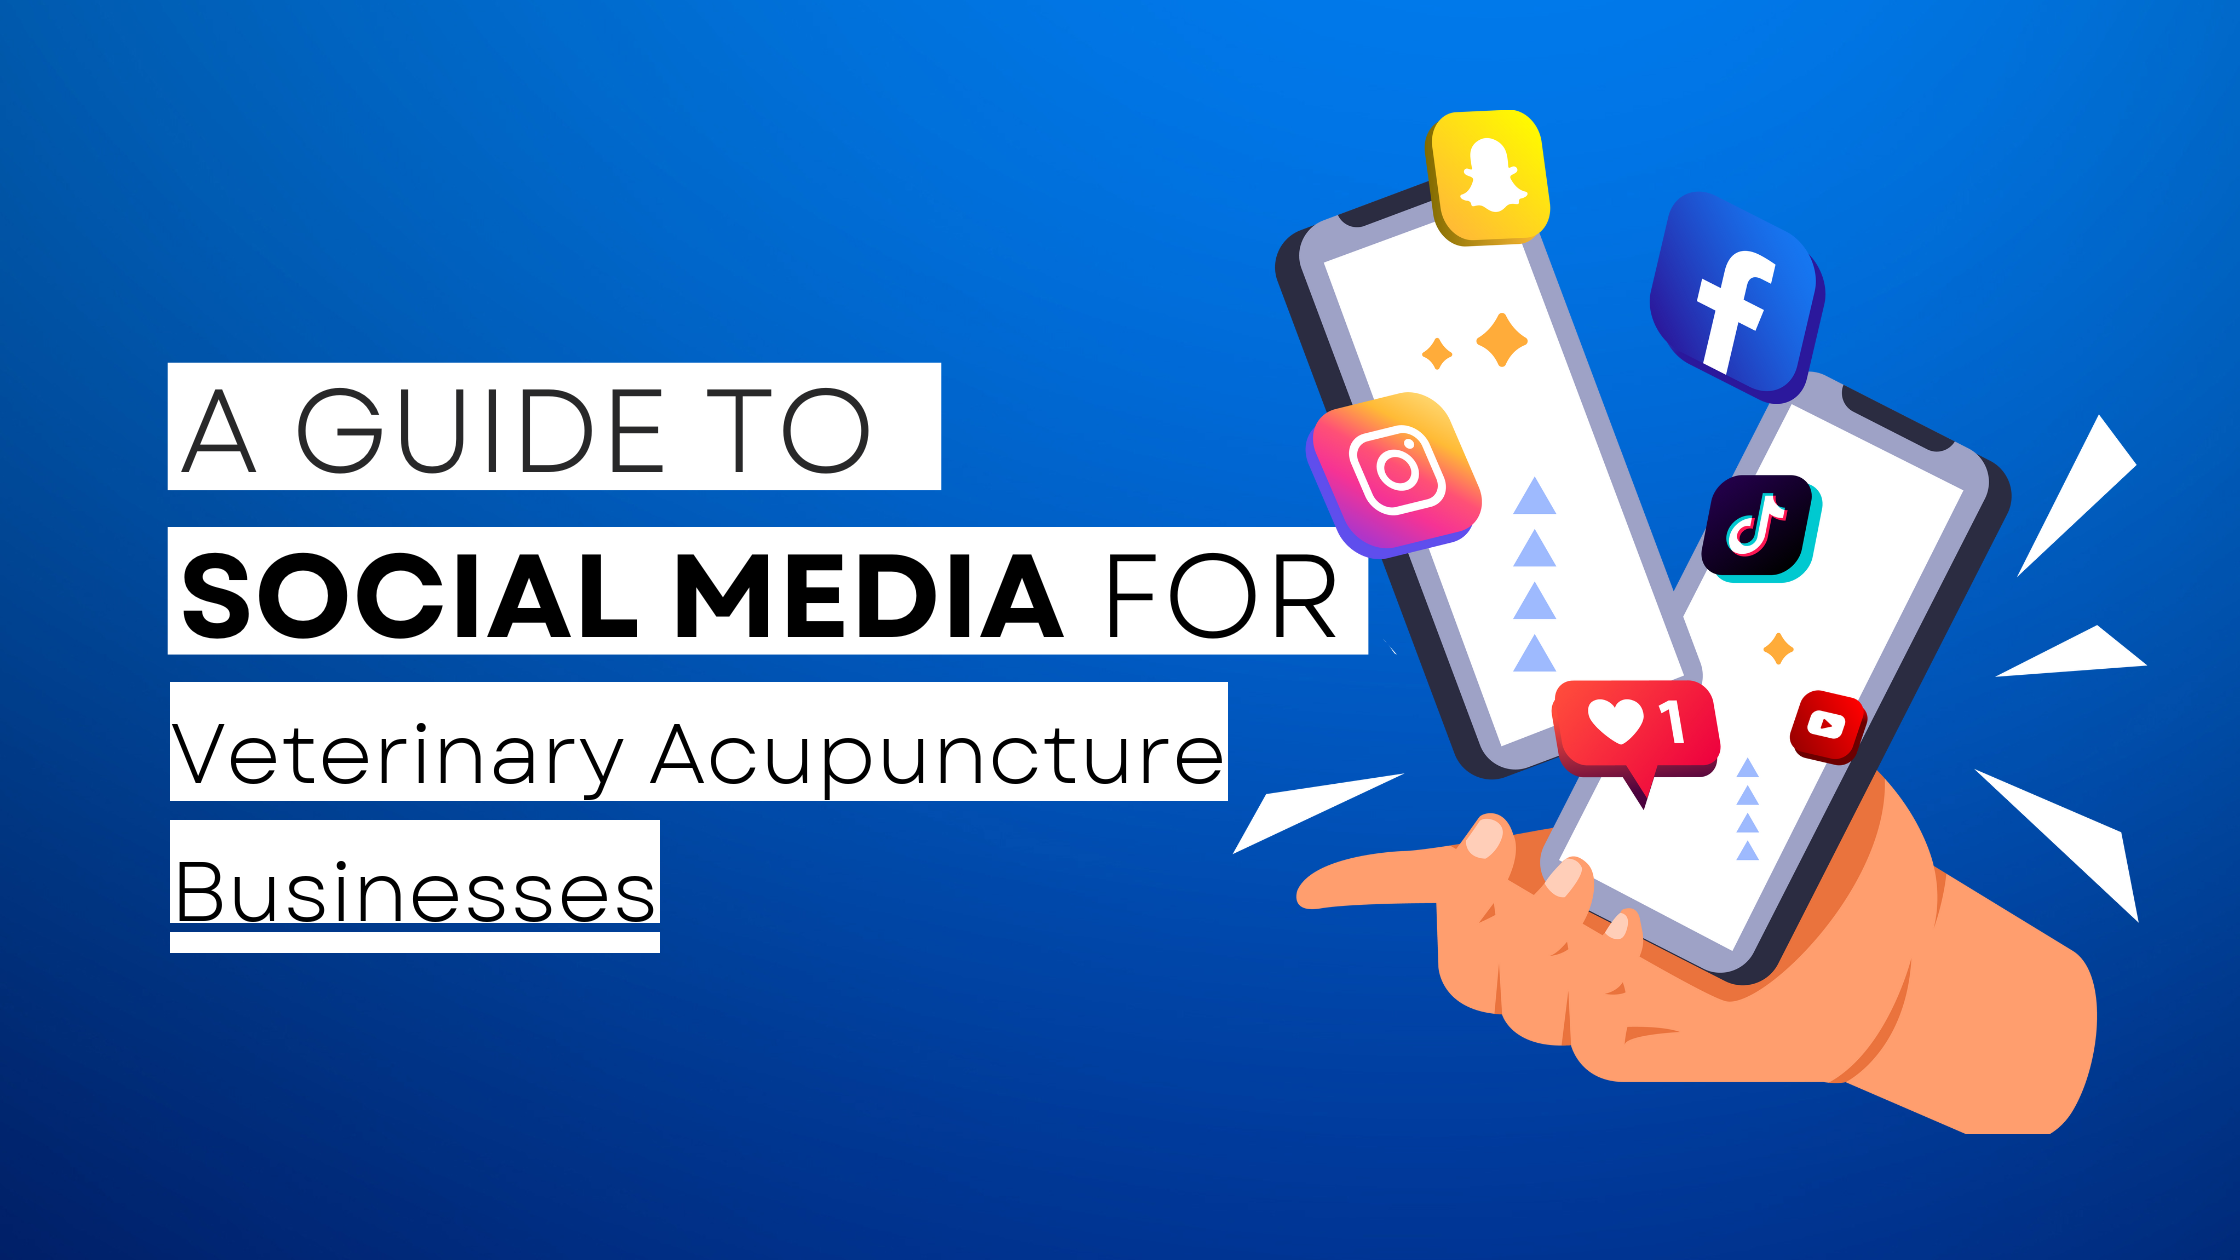 How to start Veterinary Acupuncture  on social media